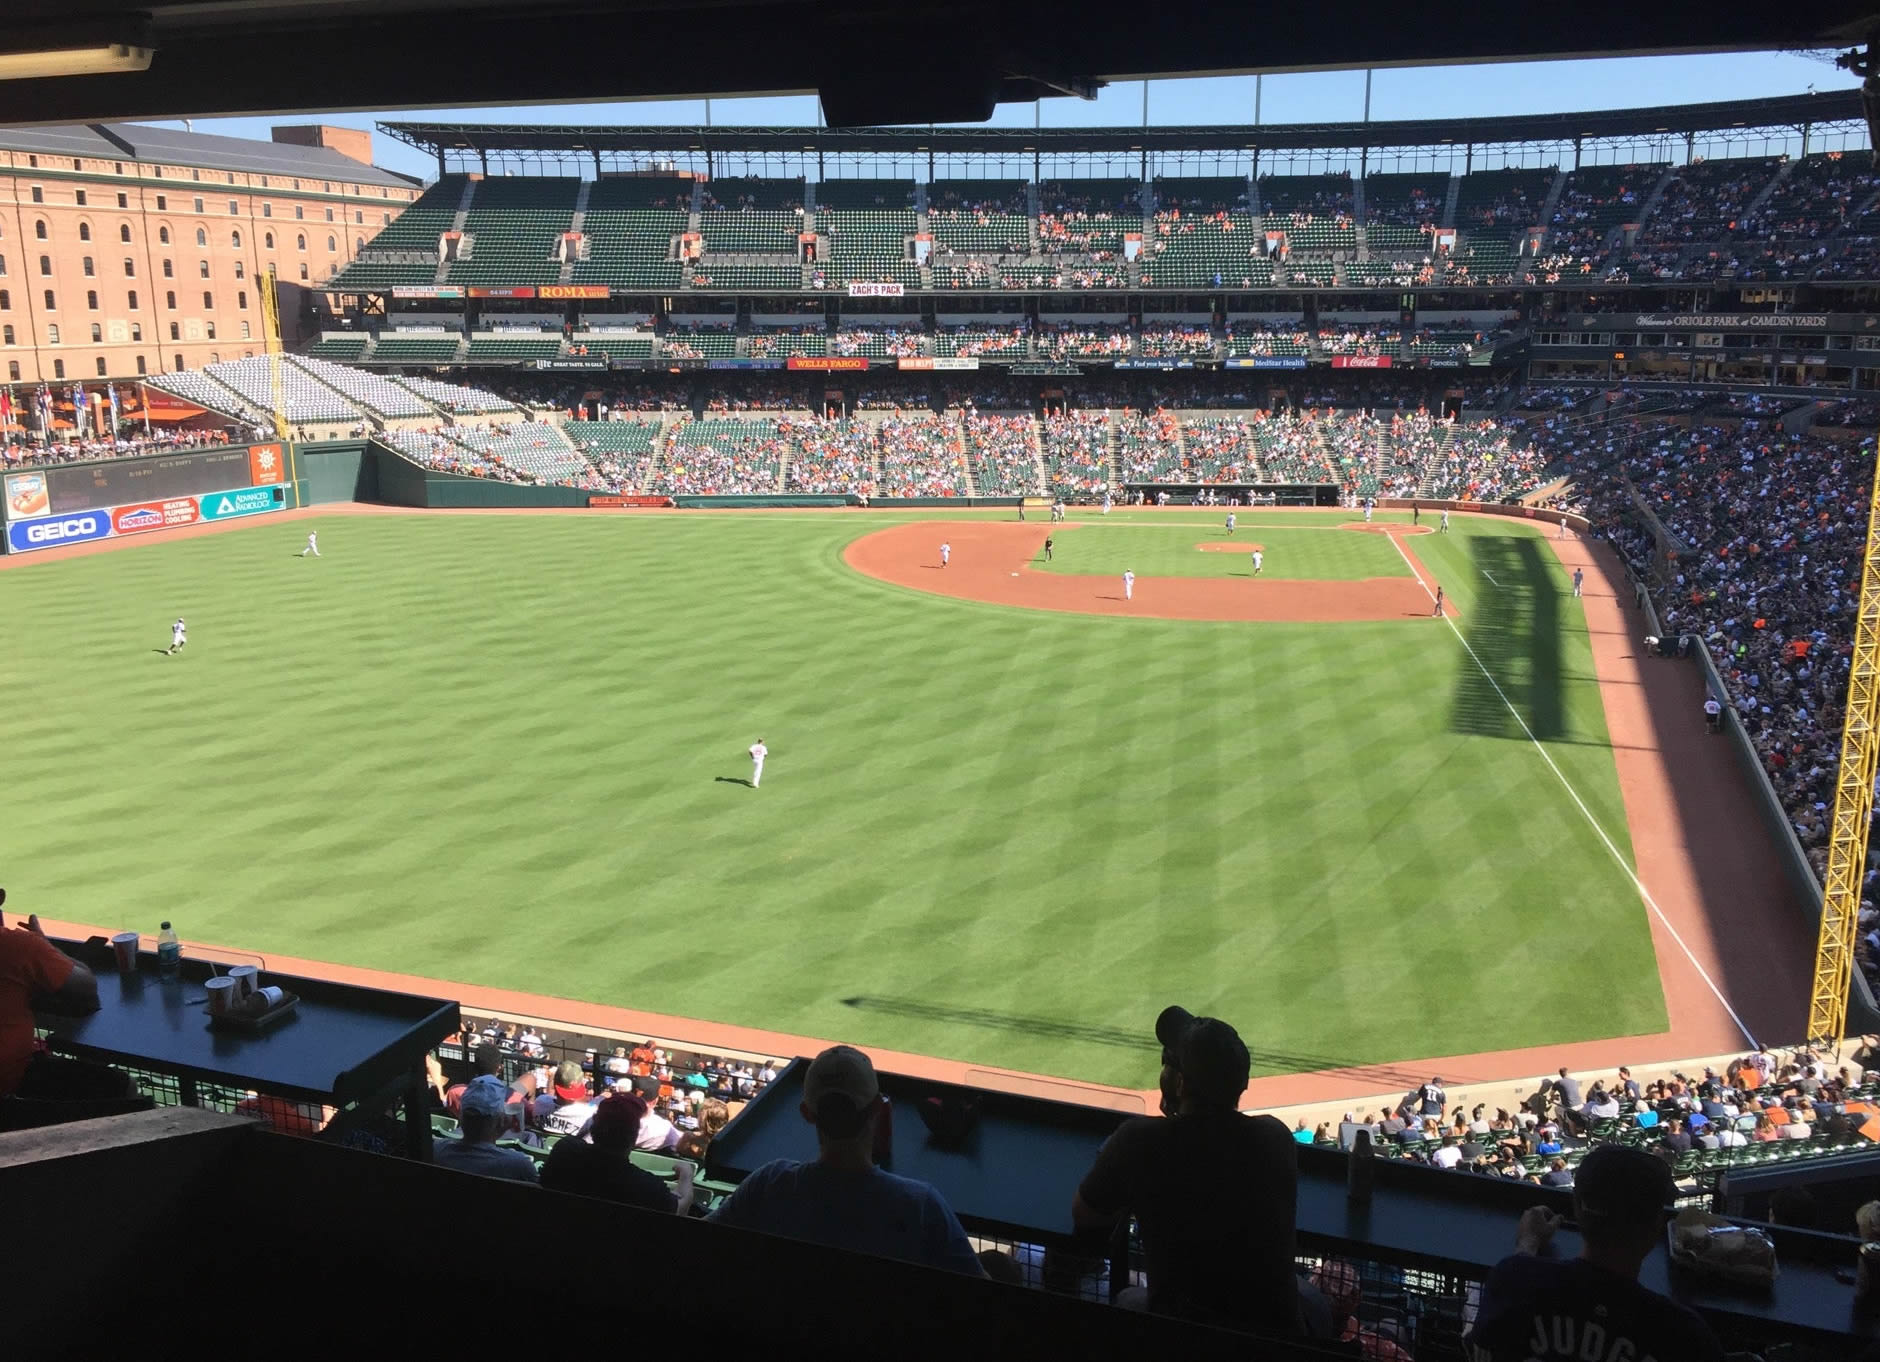 RK&K Pitches In at Oriole Park at Camden Yards